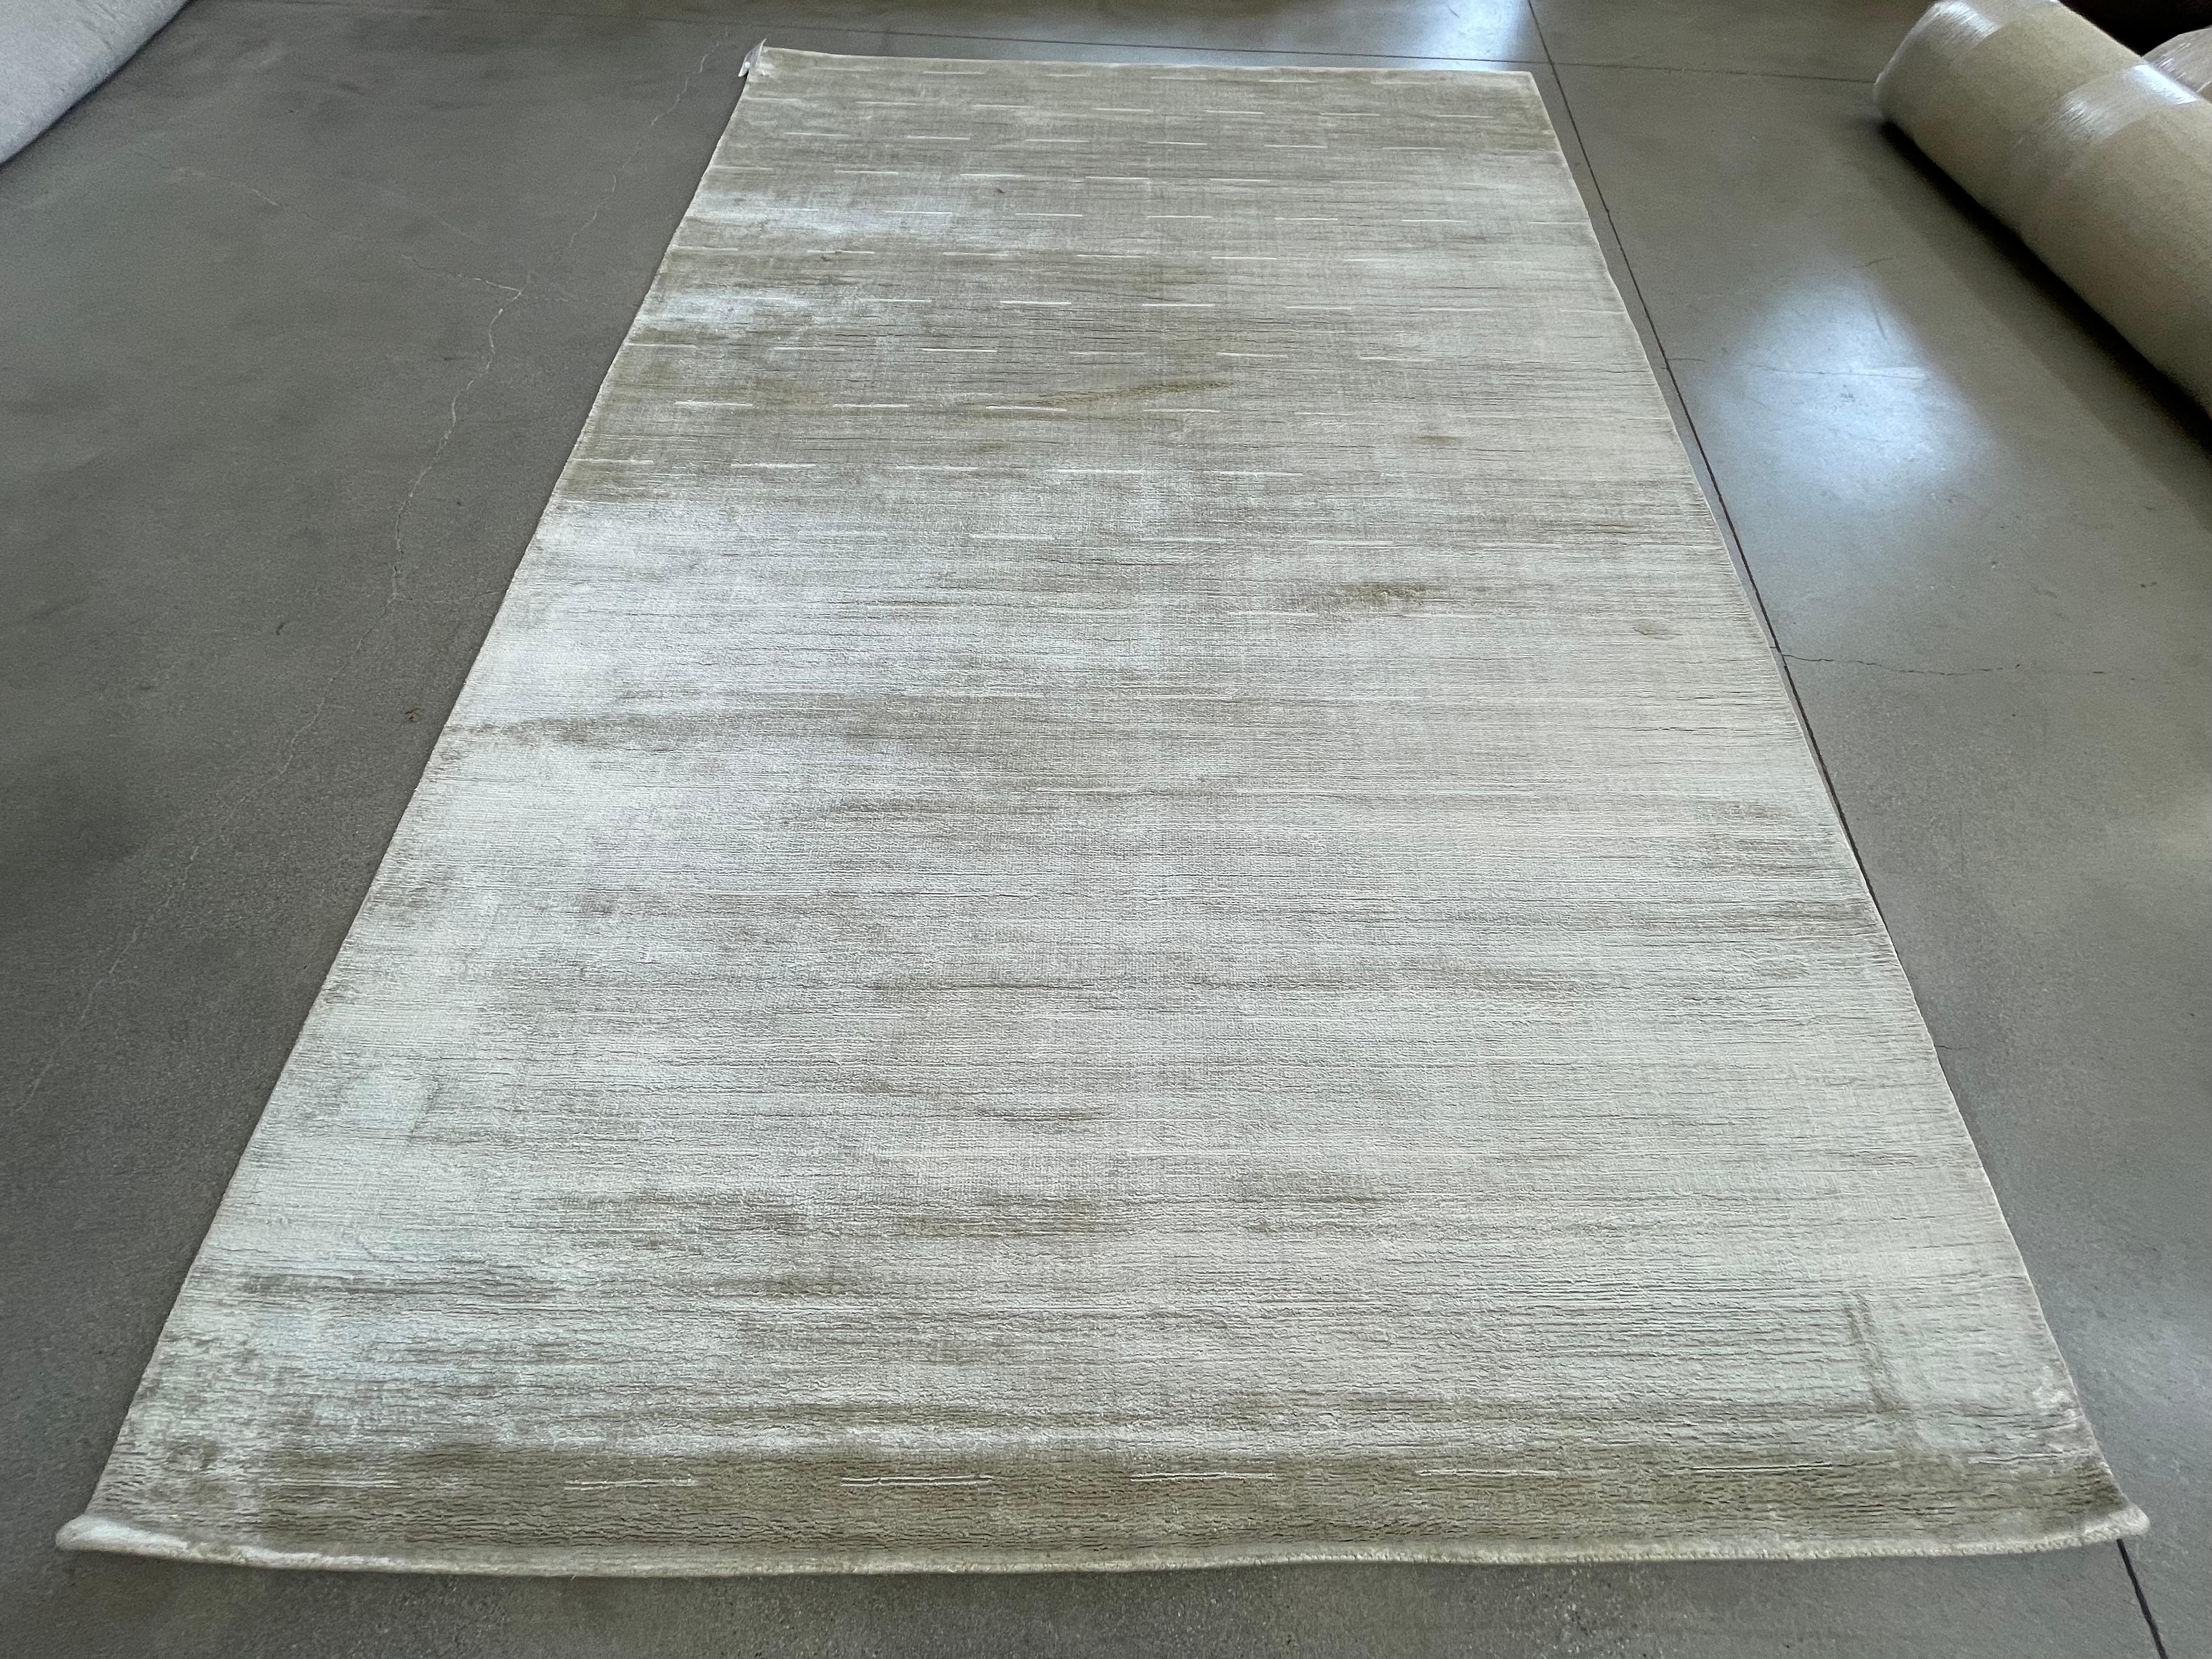 Hand-Woven Simply Luxe Light Green Area Rug - 6' x 9' For Sale